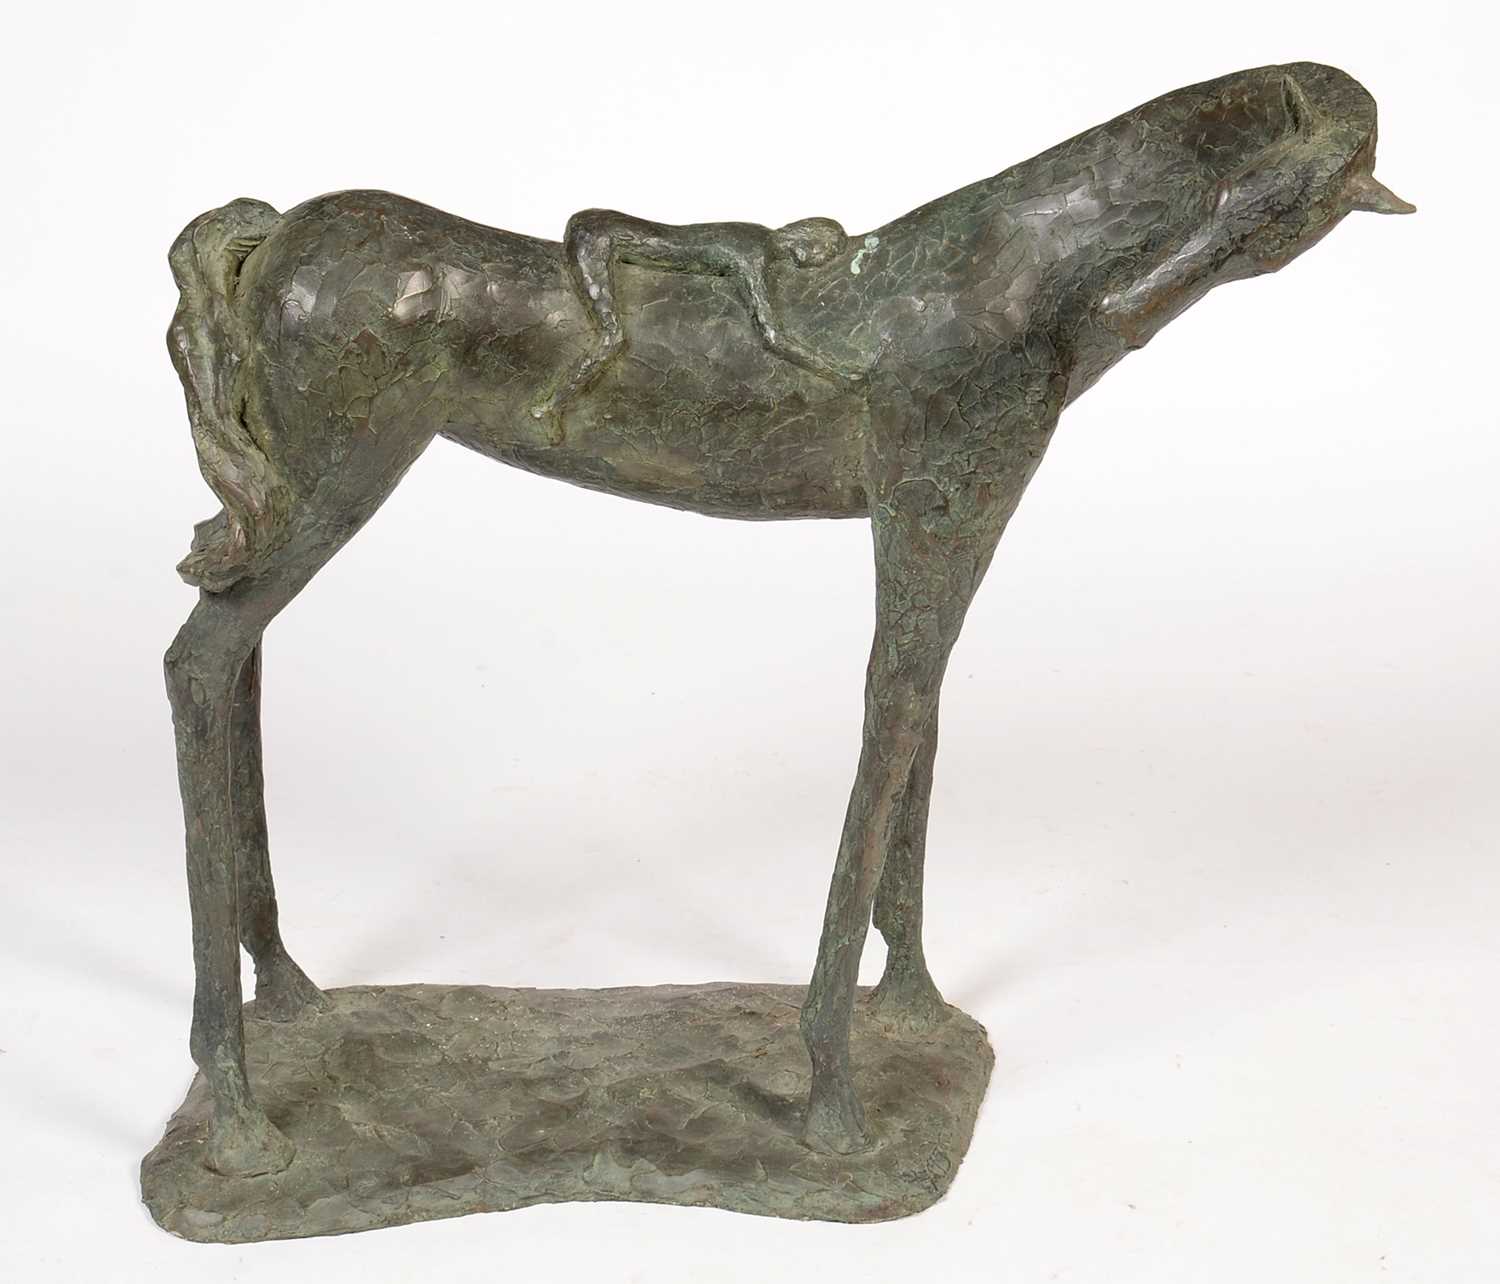 A contemporary resin model of a small figure resting on a horse